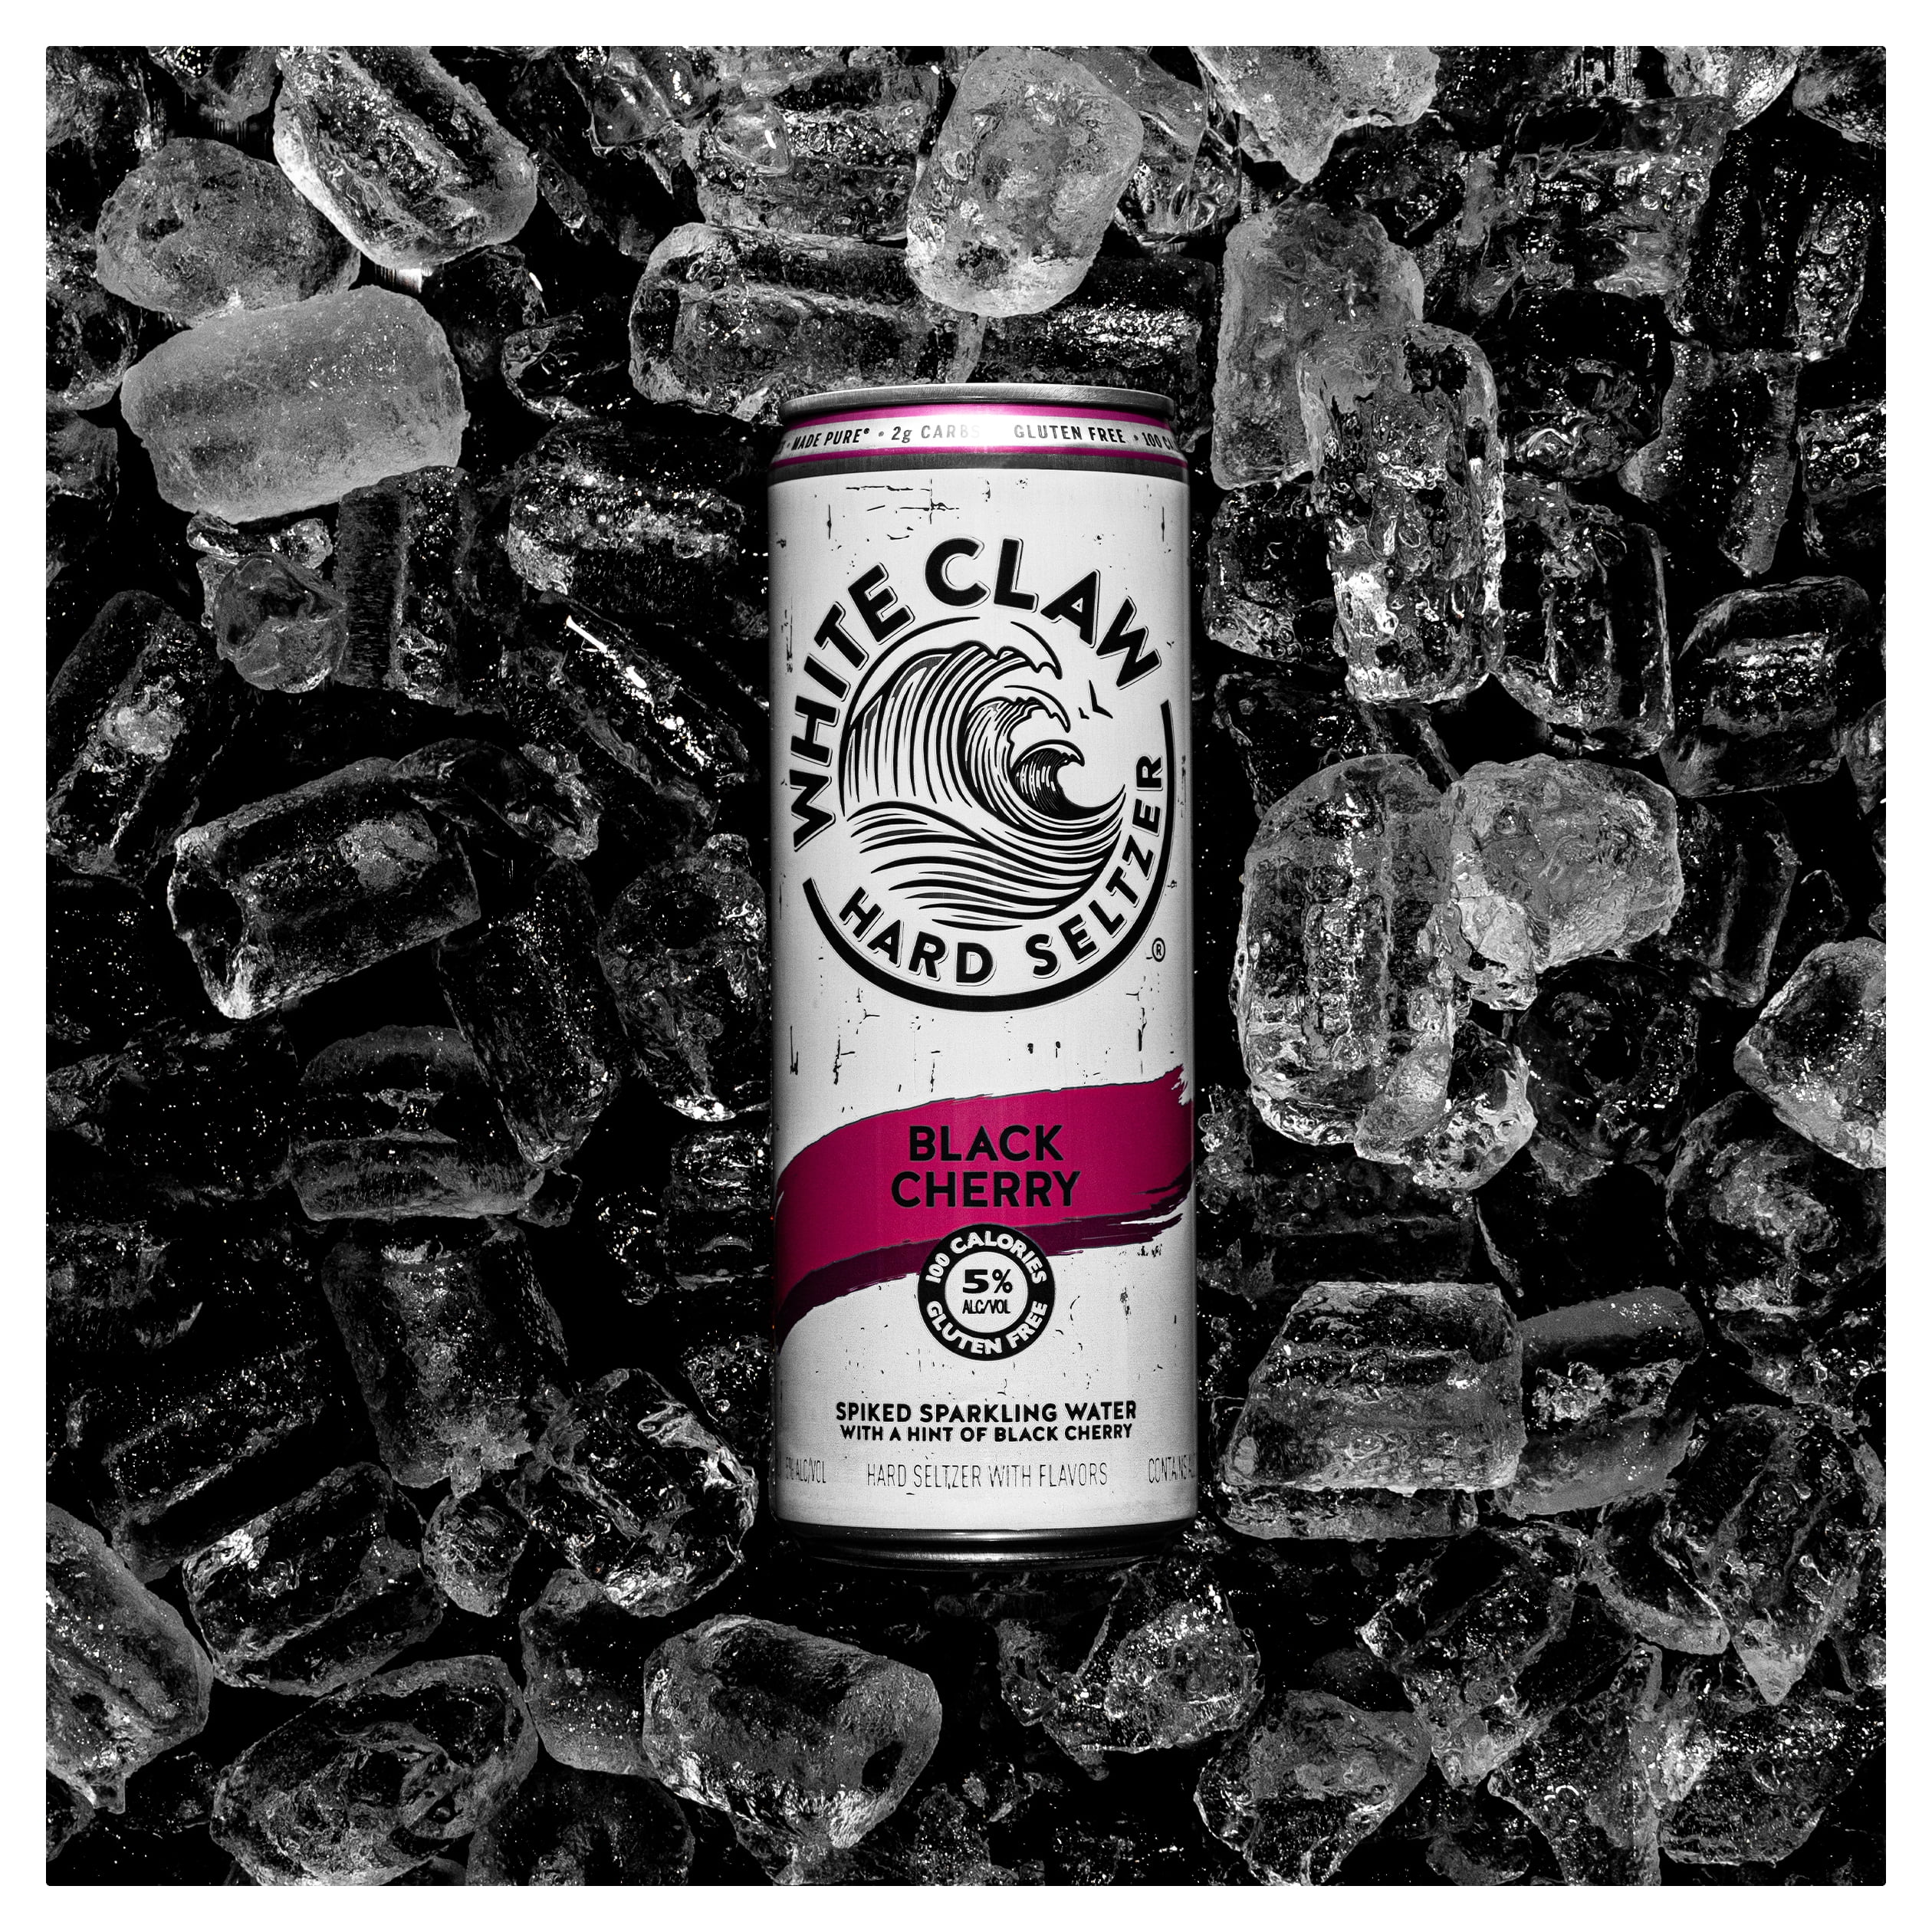 Buy White Claw Hard Seltzer Black Chery Pack Online At Lowest Price